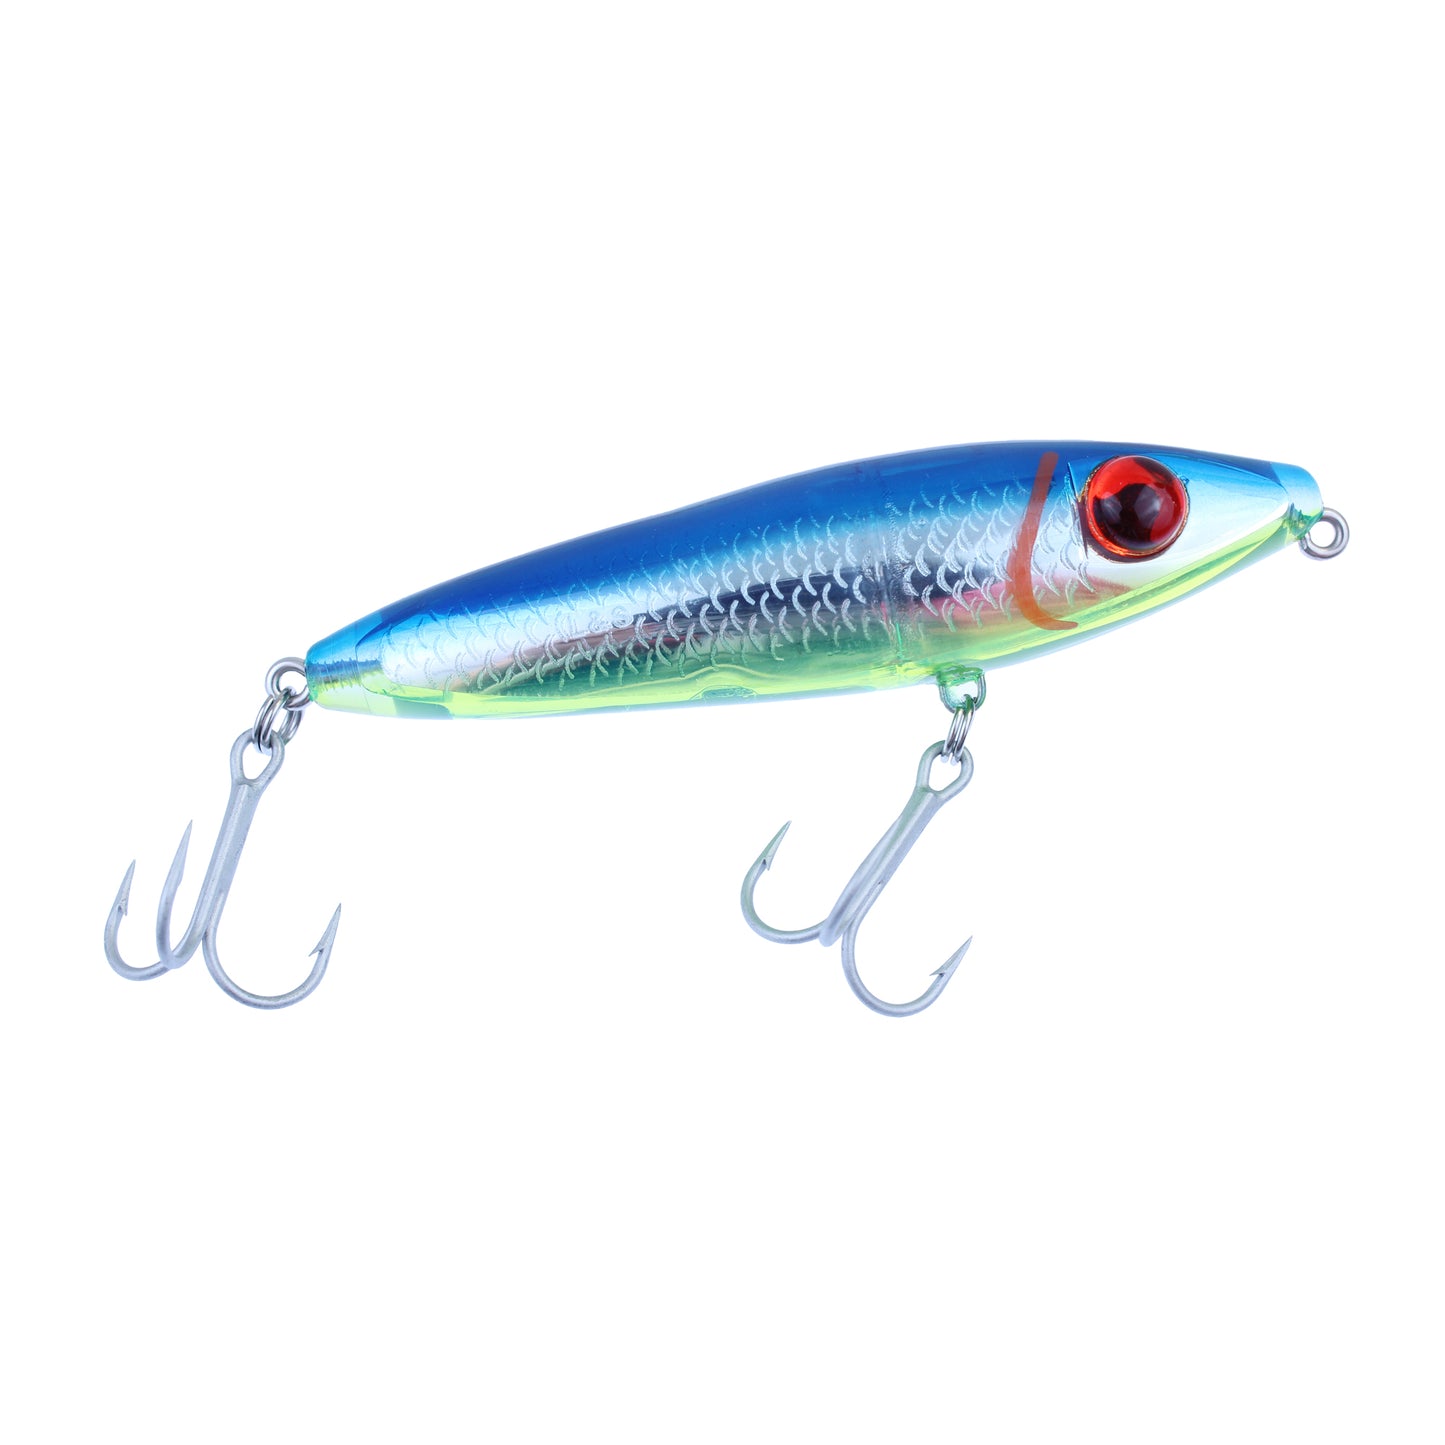 Mirrolure Top Dog 94MR Chartreuse/Blue Back/Silver Scales